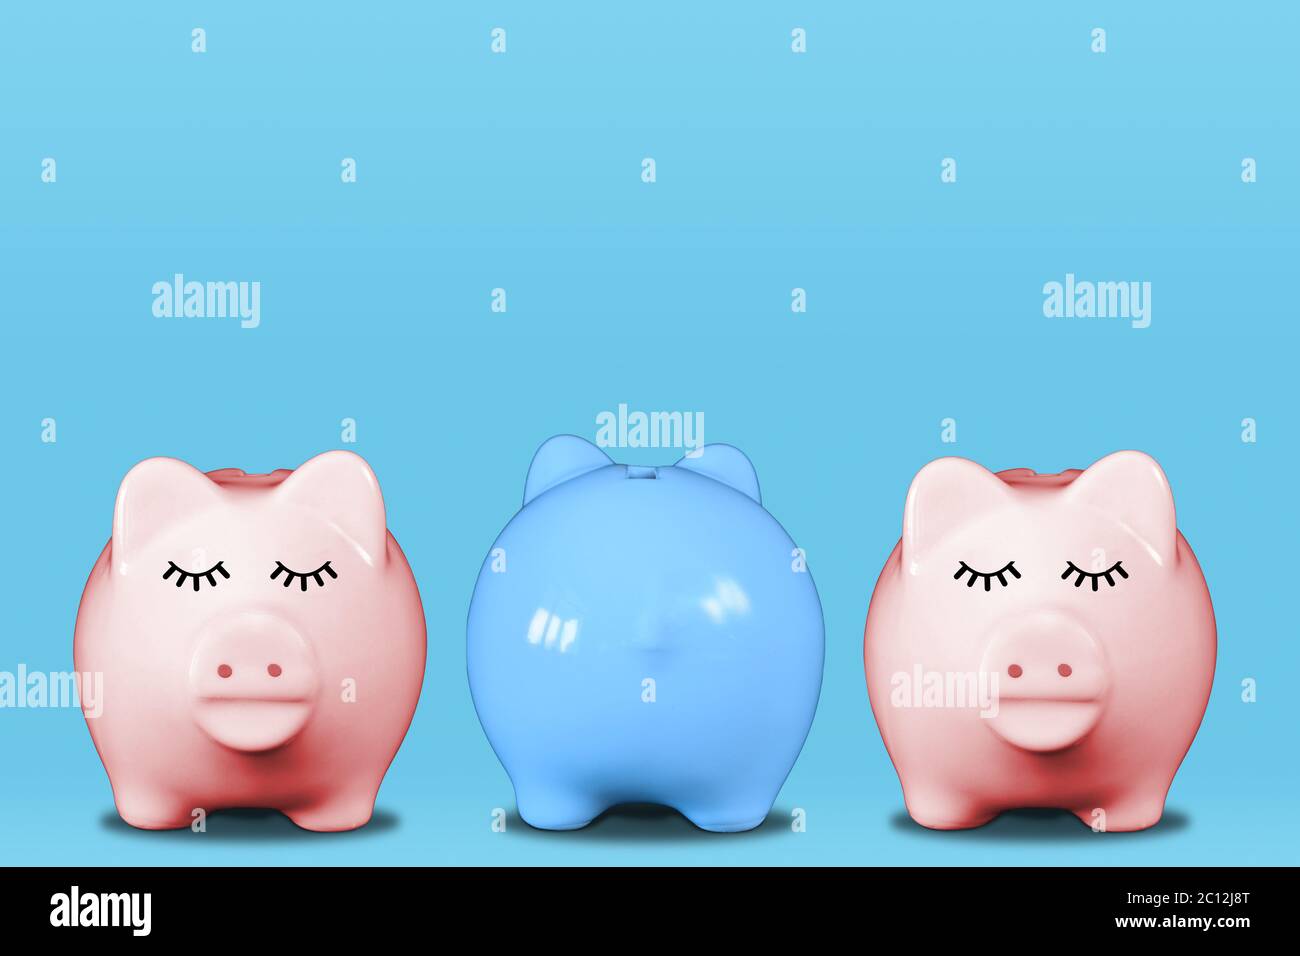 Stand out from the crowd or odd one out concept with piggy banks in a row with middle one in blue and turning its back. Concept includes discriminatio Stock Photo